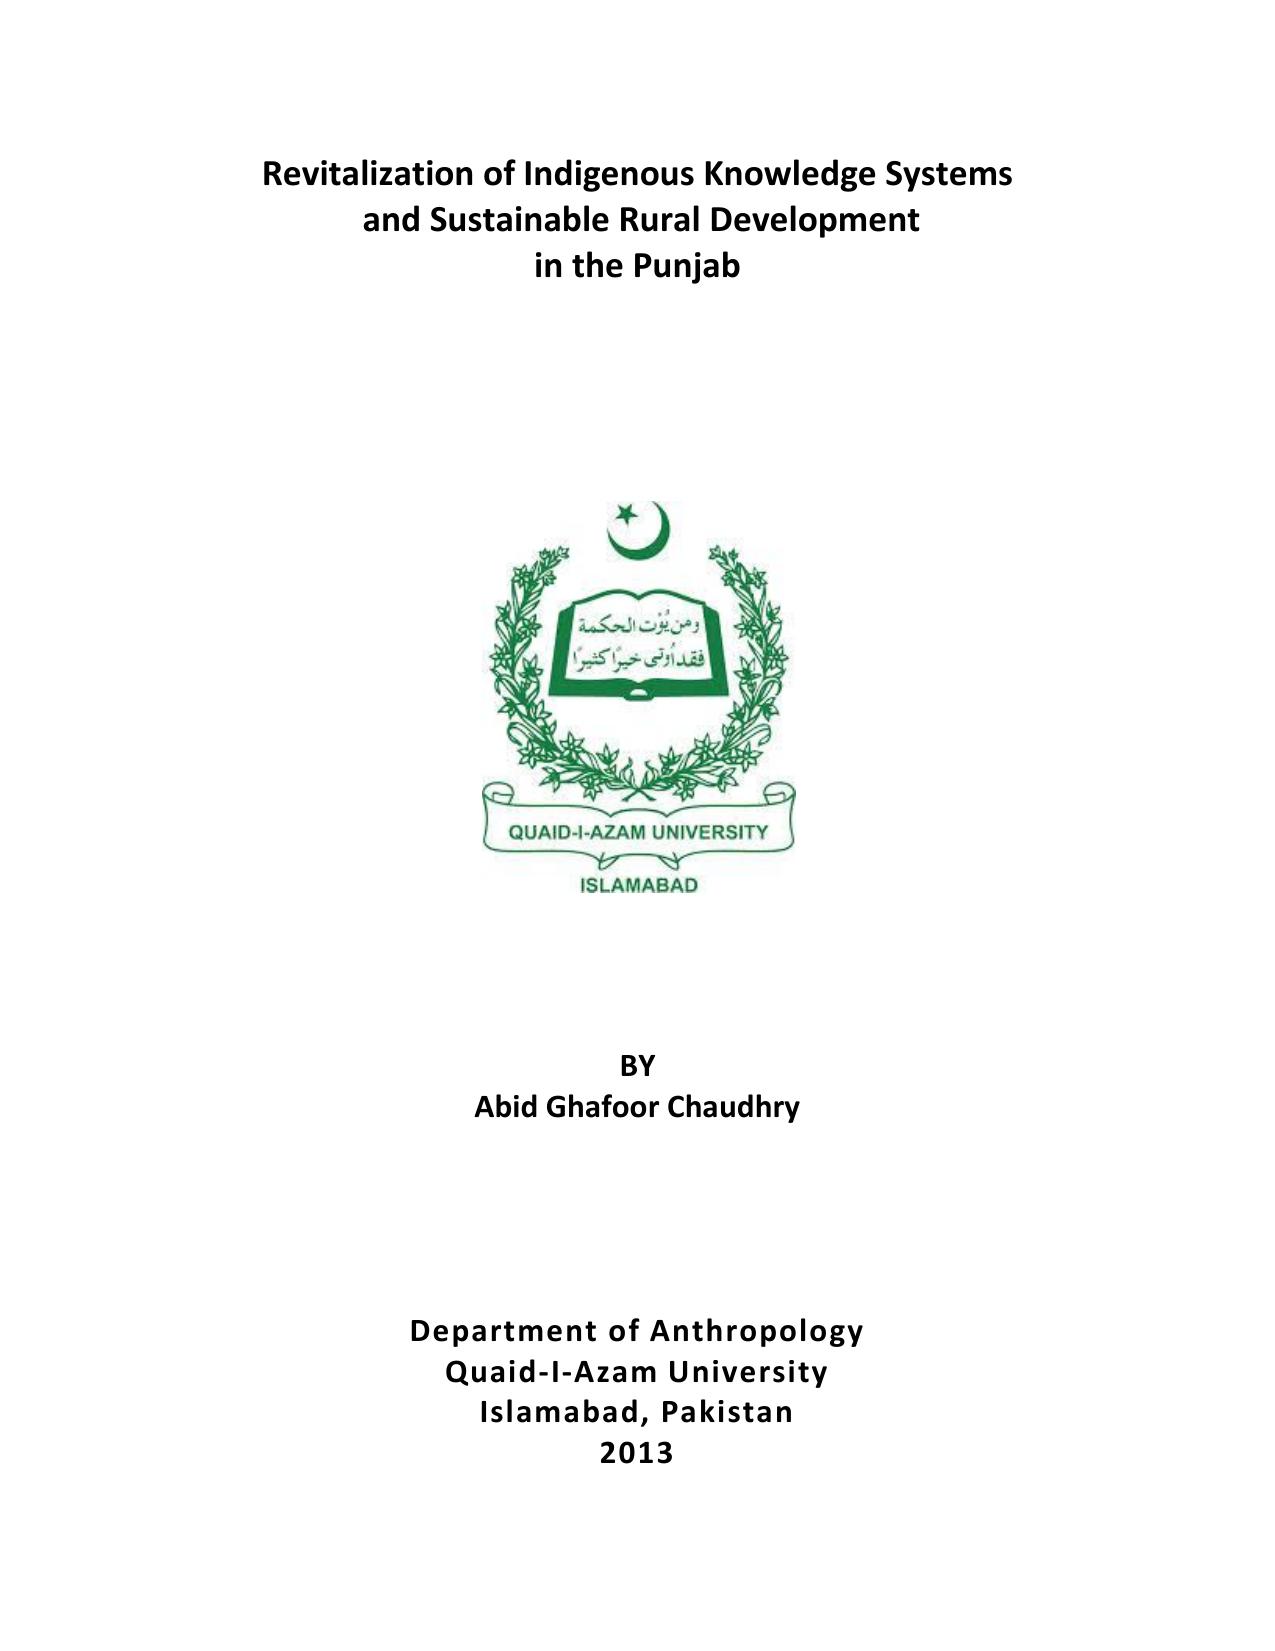 Revitalization of Indigenous Knowledge Systems and Sustainable Rural Development in the Punjab 2013